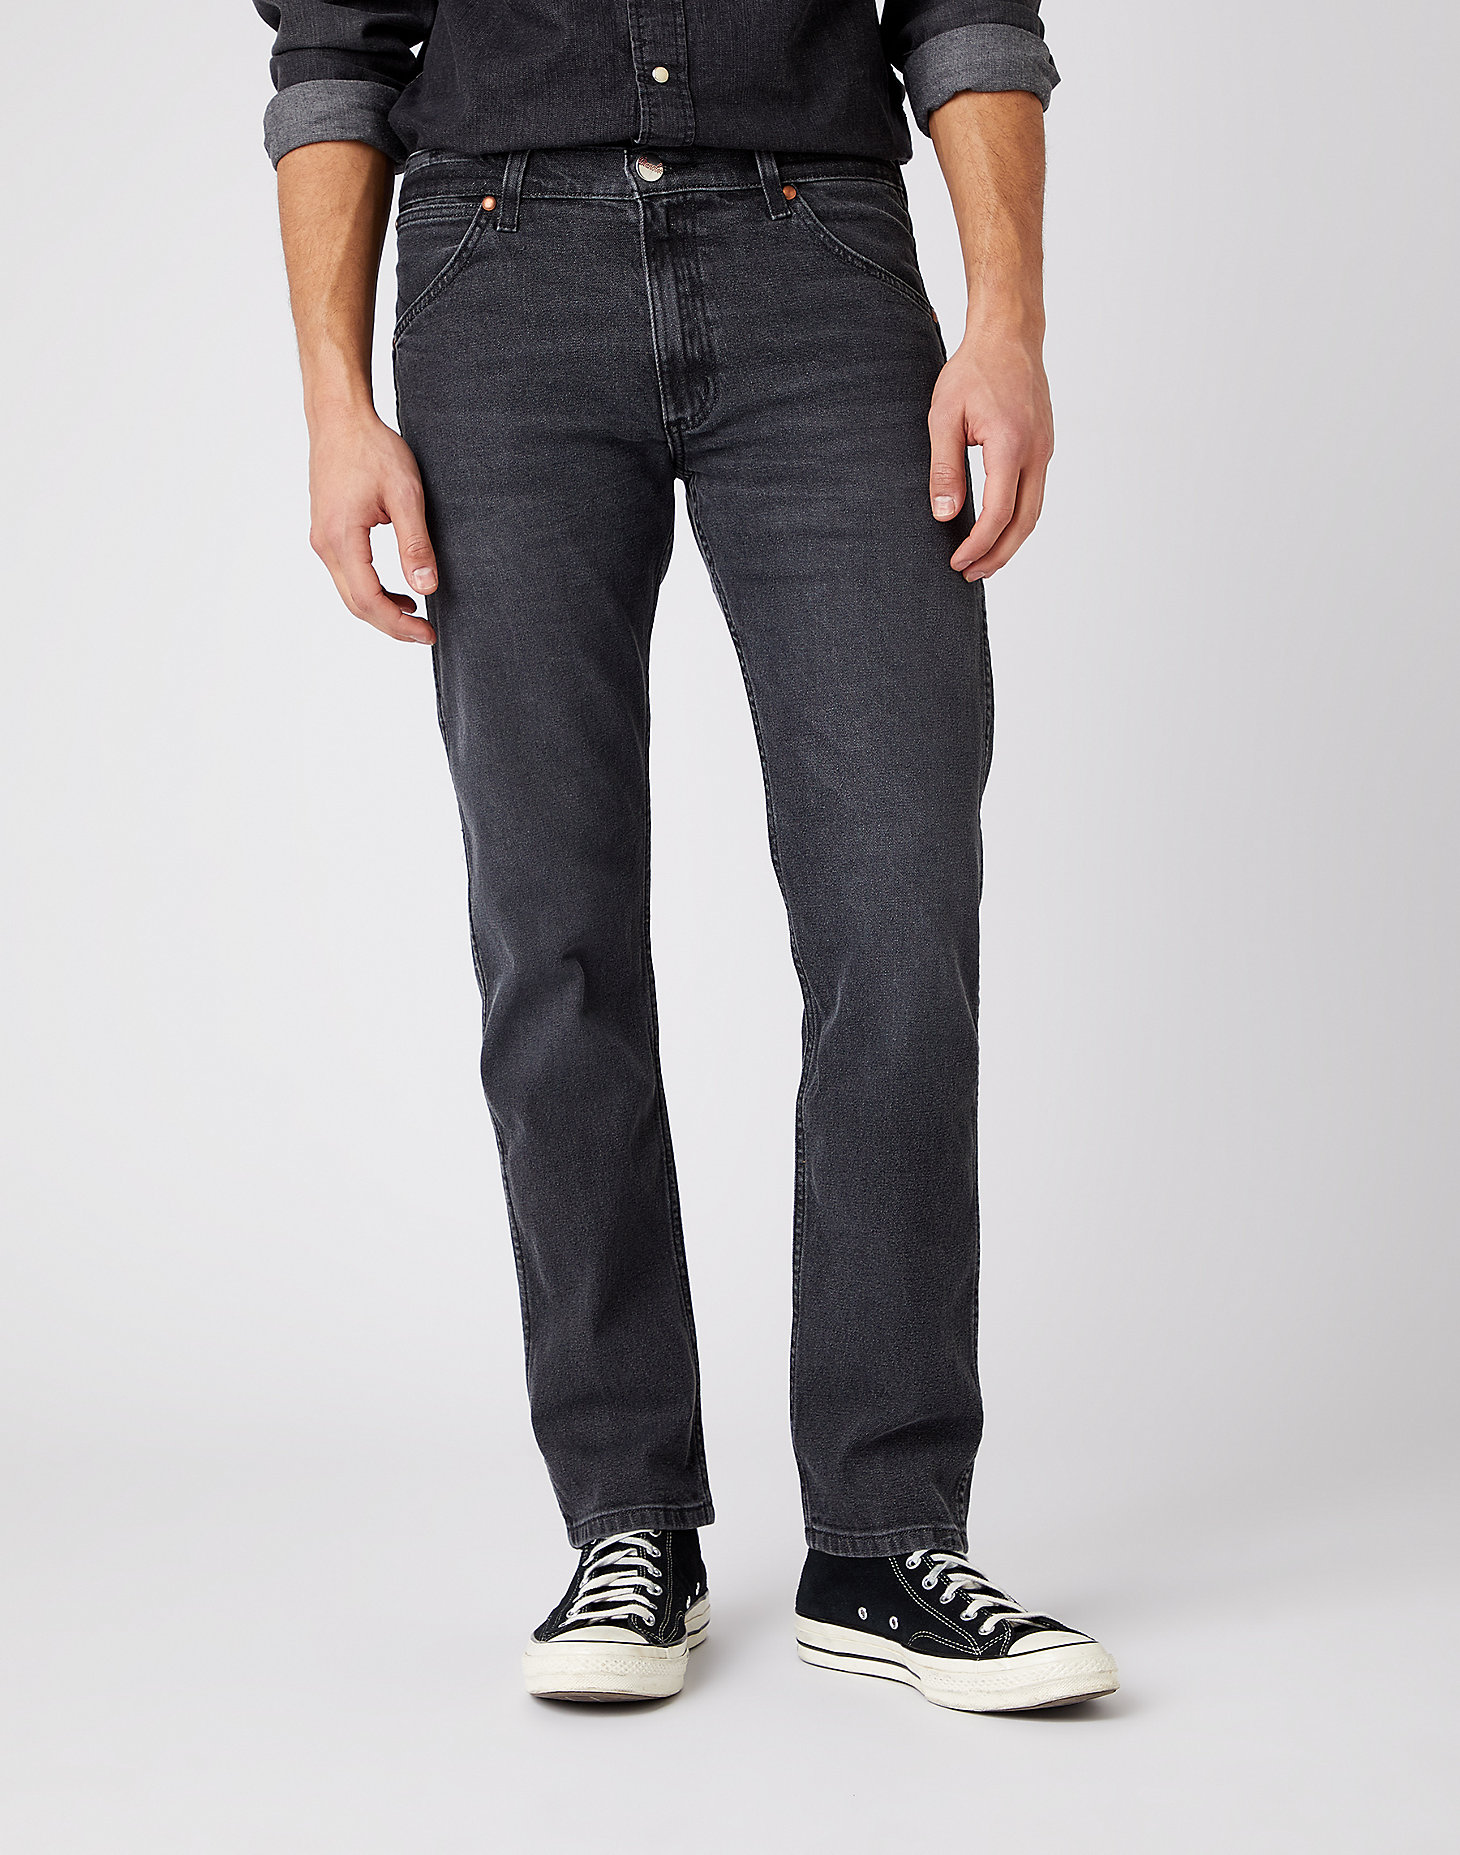 Indigood Icons 11MWZ Western Slim Jeans in Black Ace main view